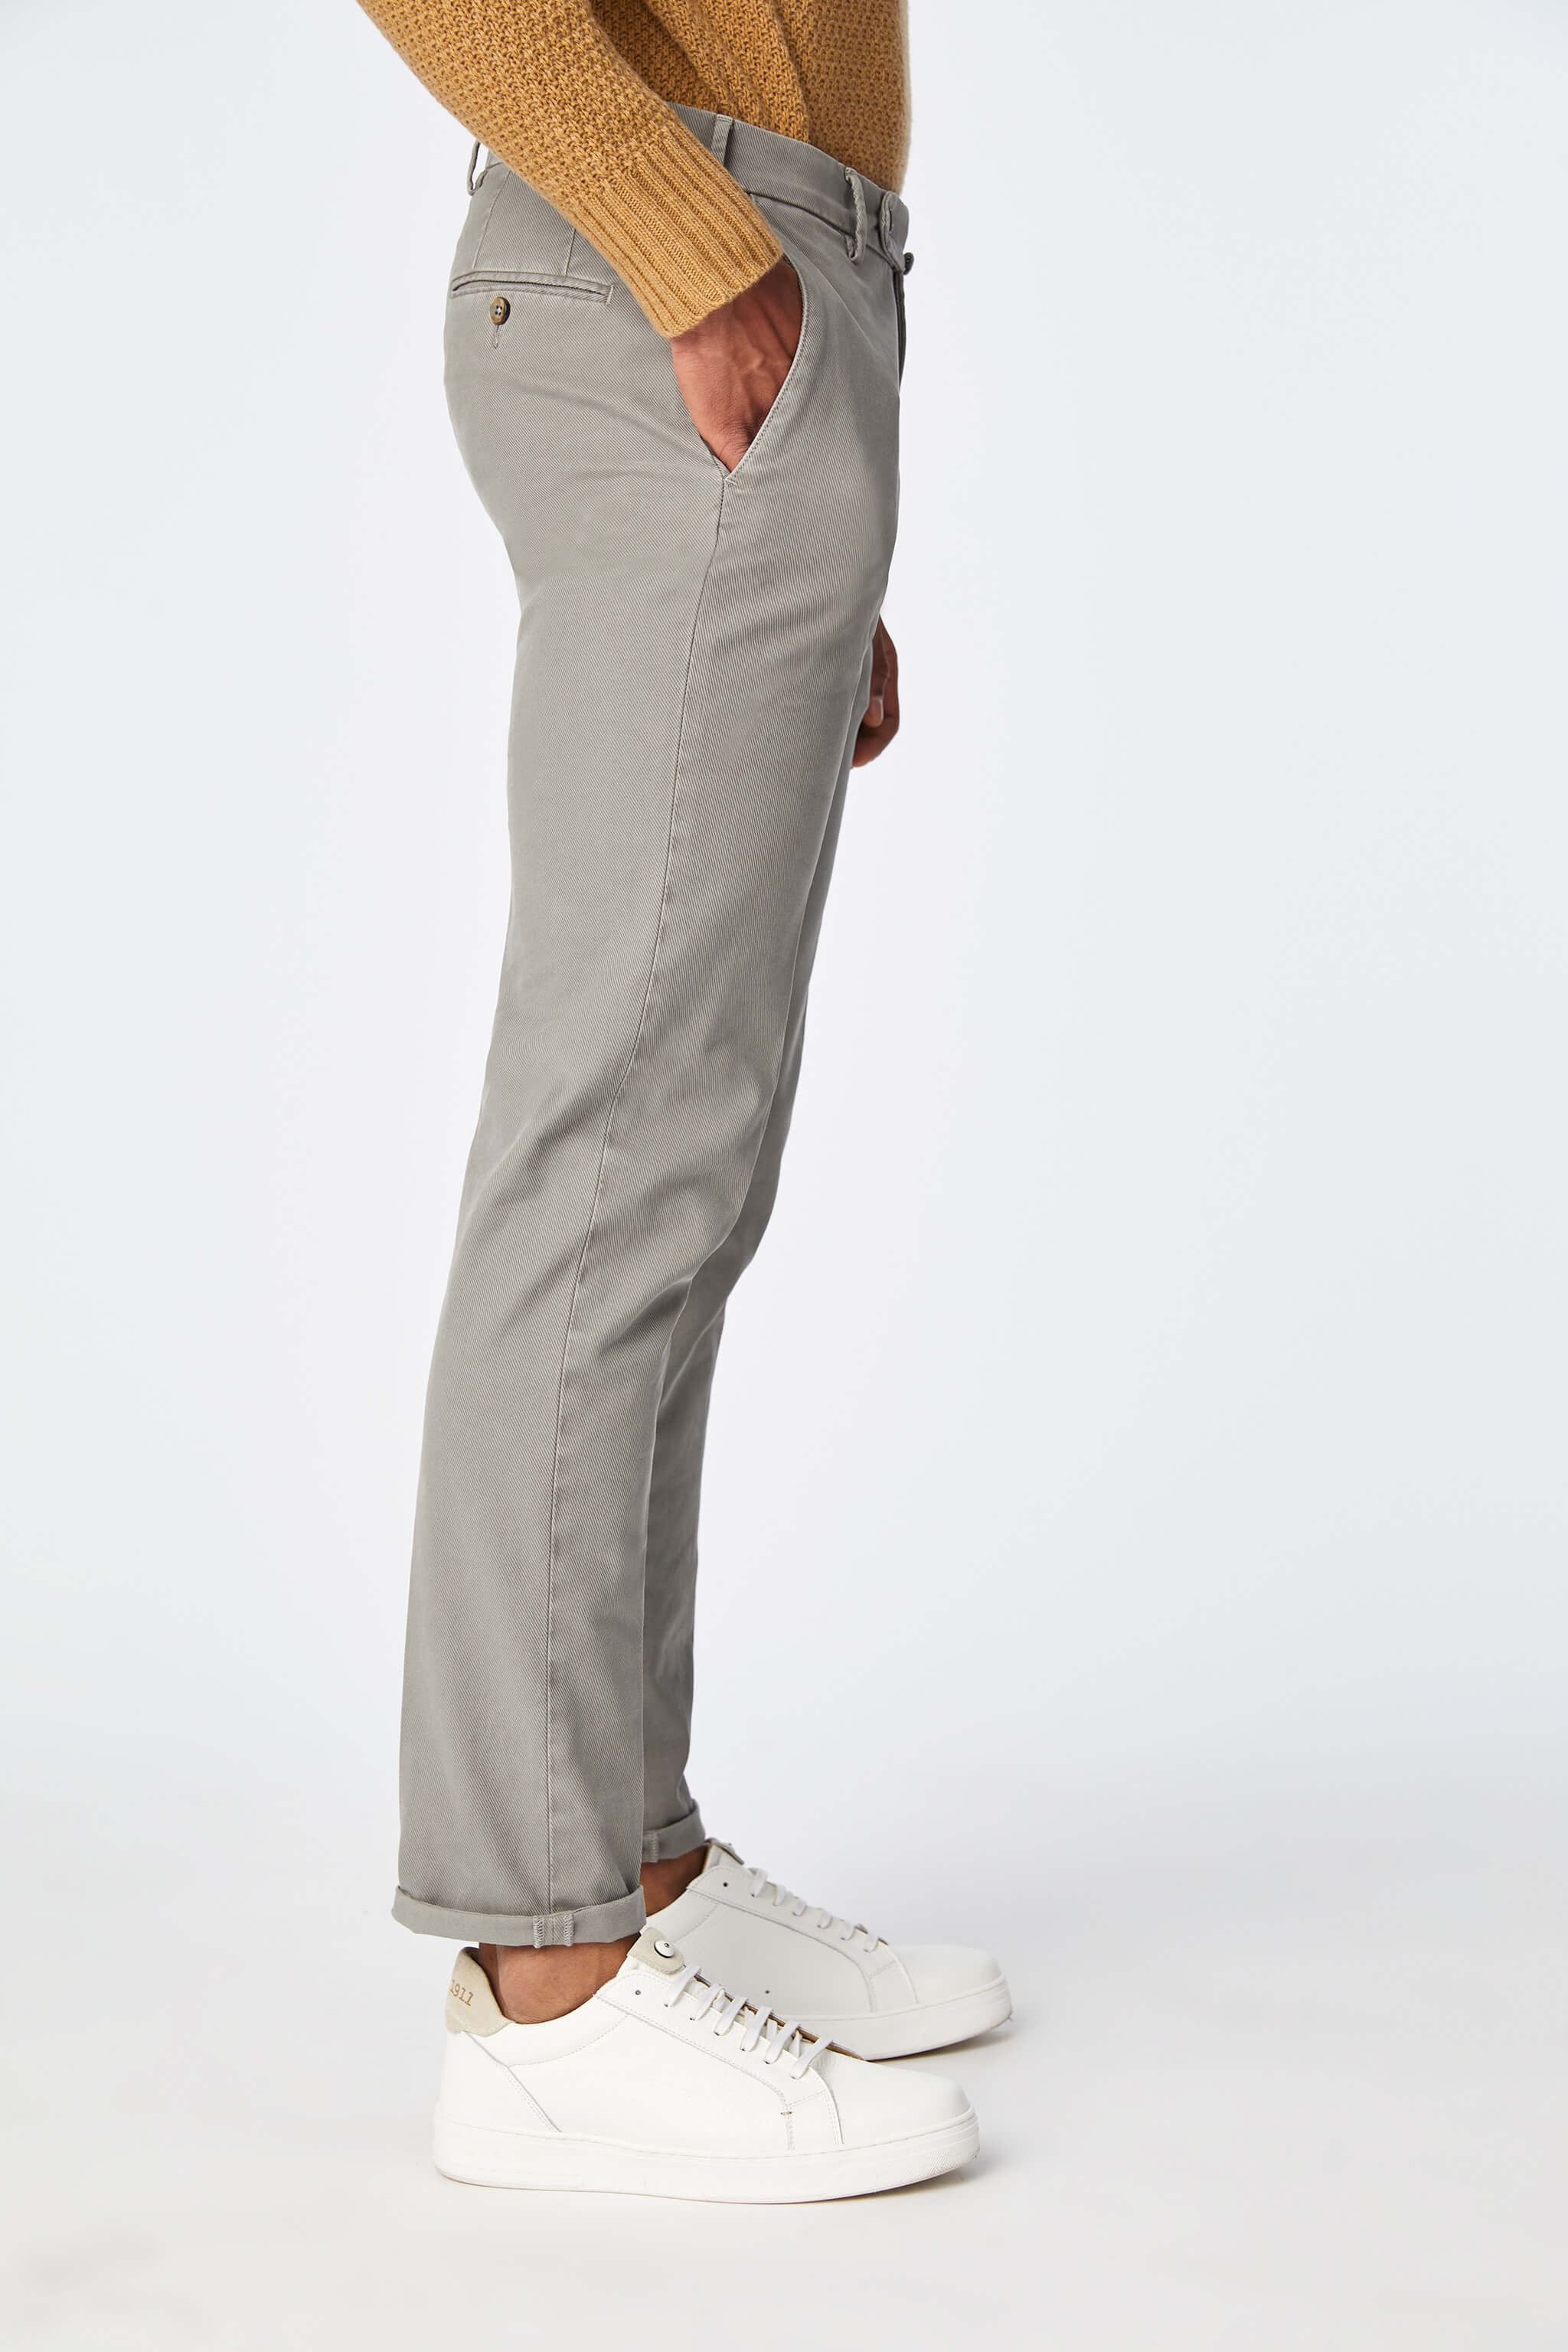 Garment-dyed RAY pants in light gray